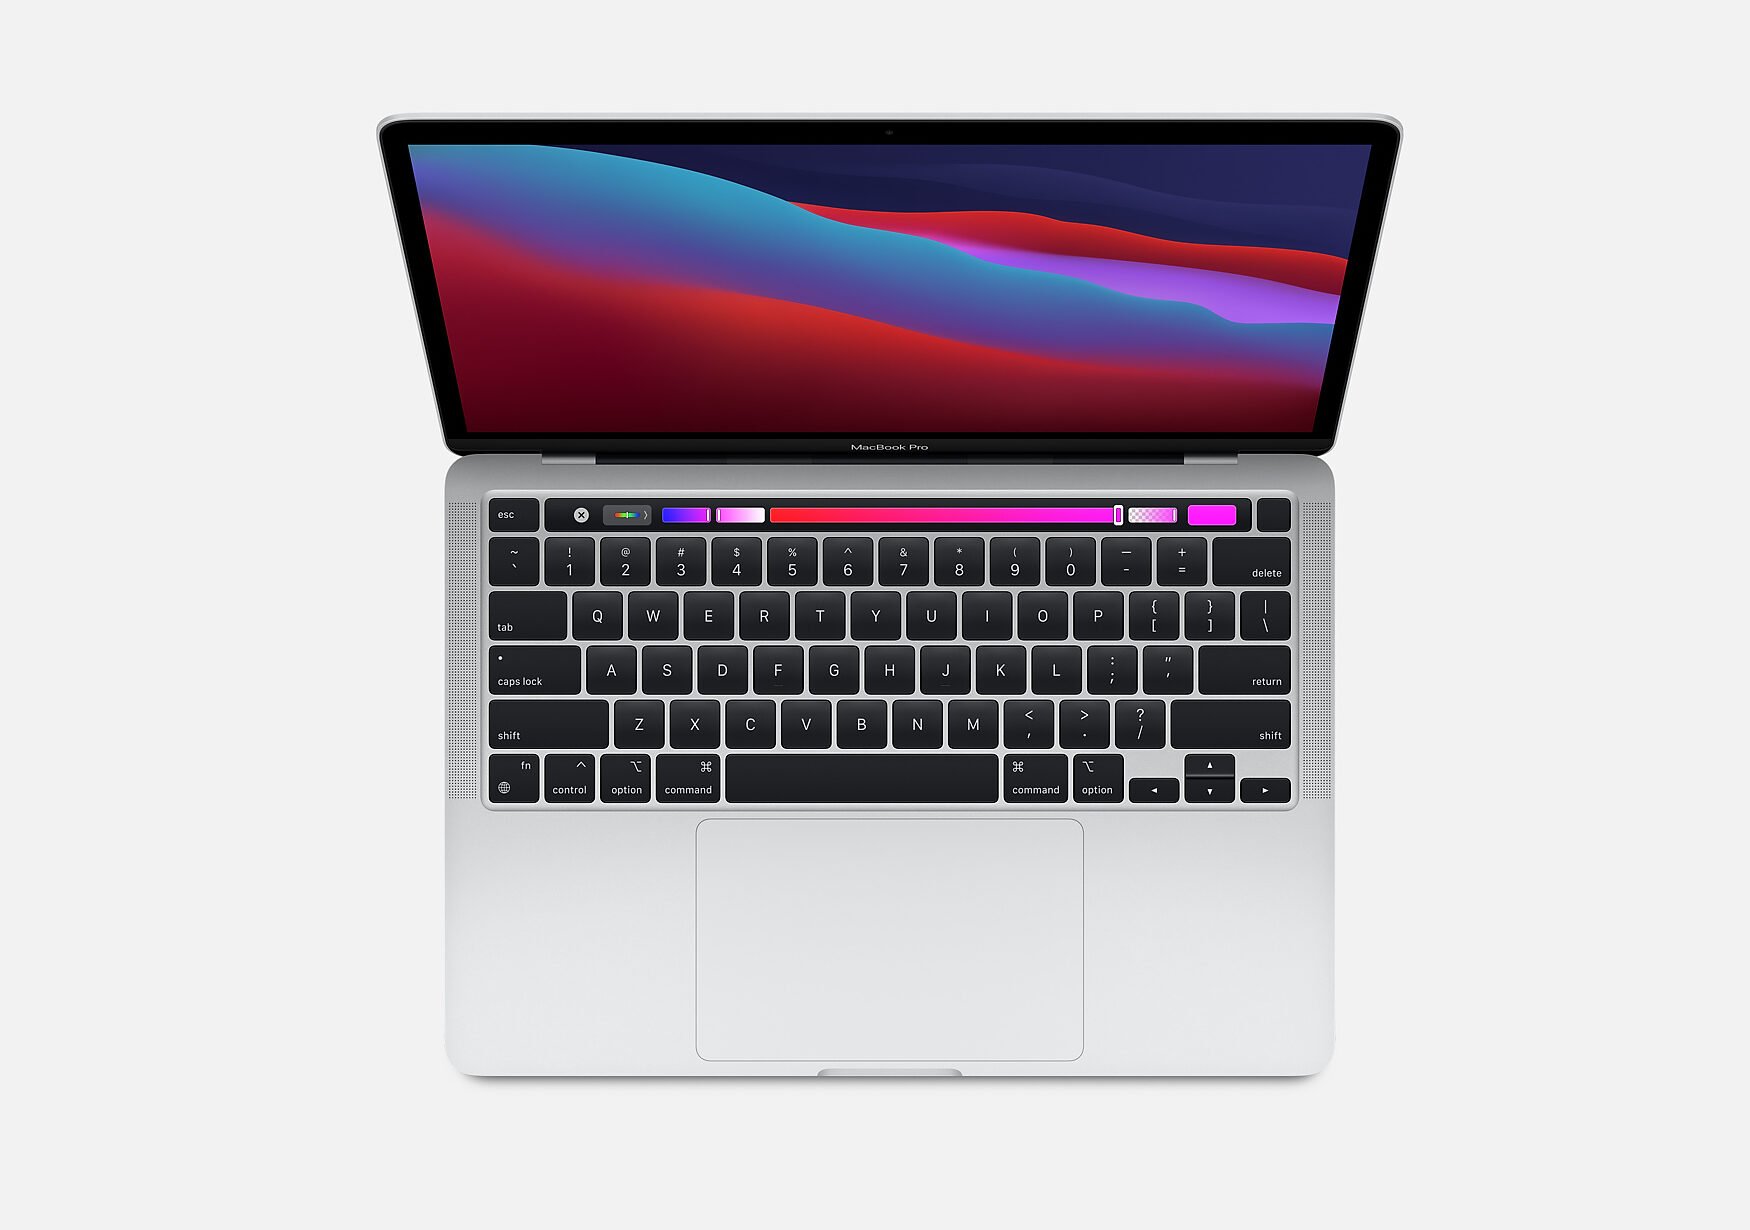 Apple’s upcoming MacBook Pro models could feature Mini LED display